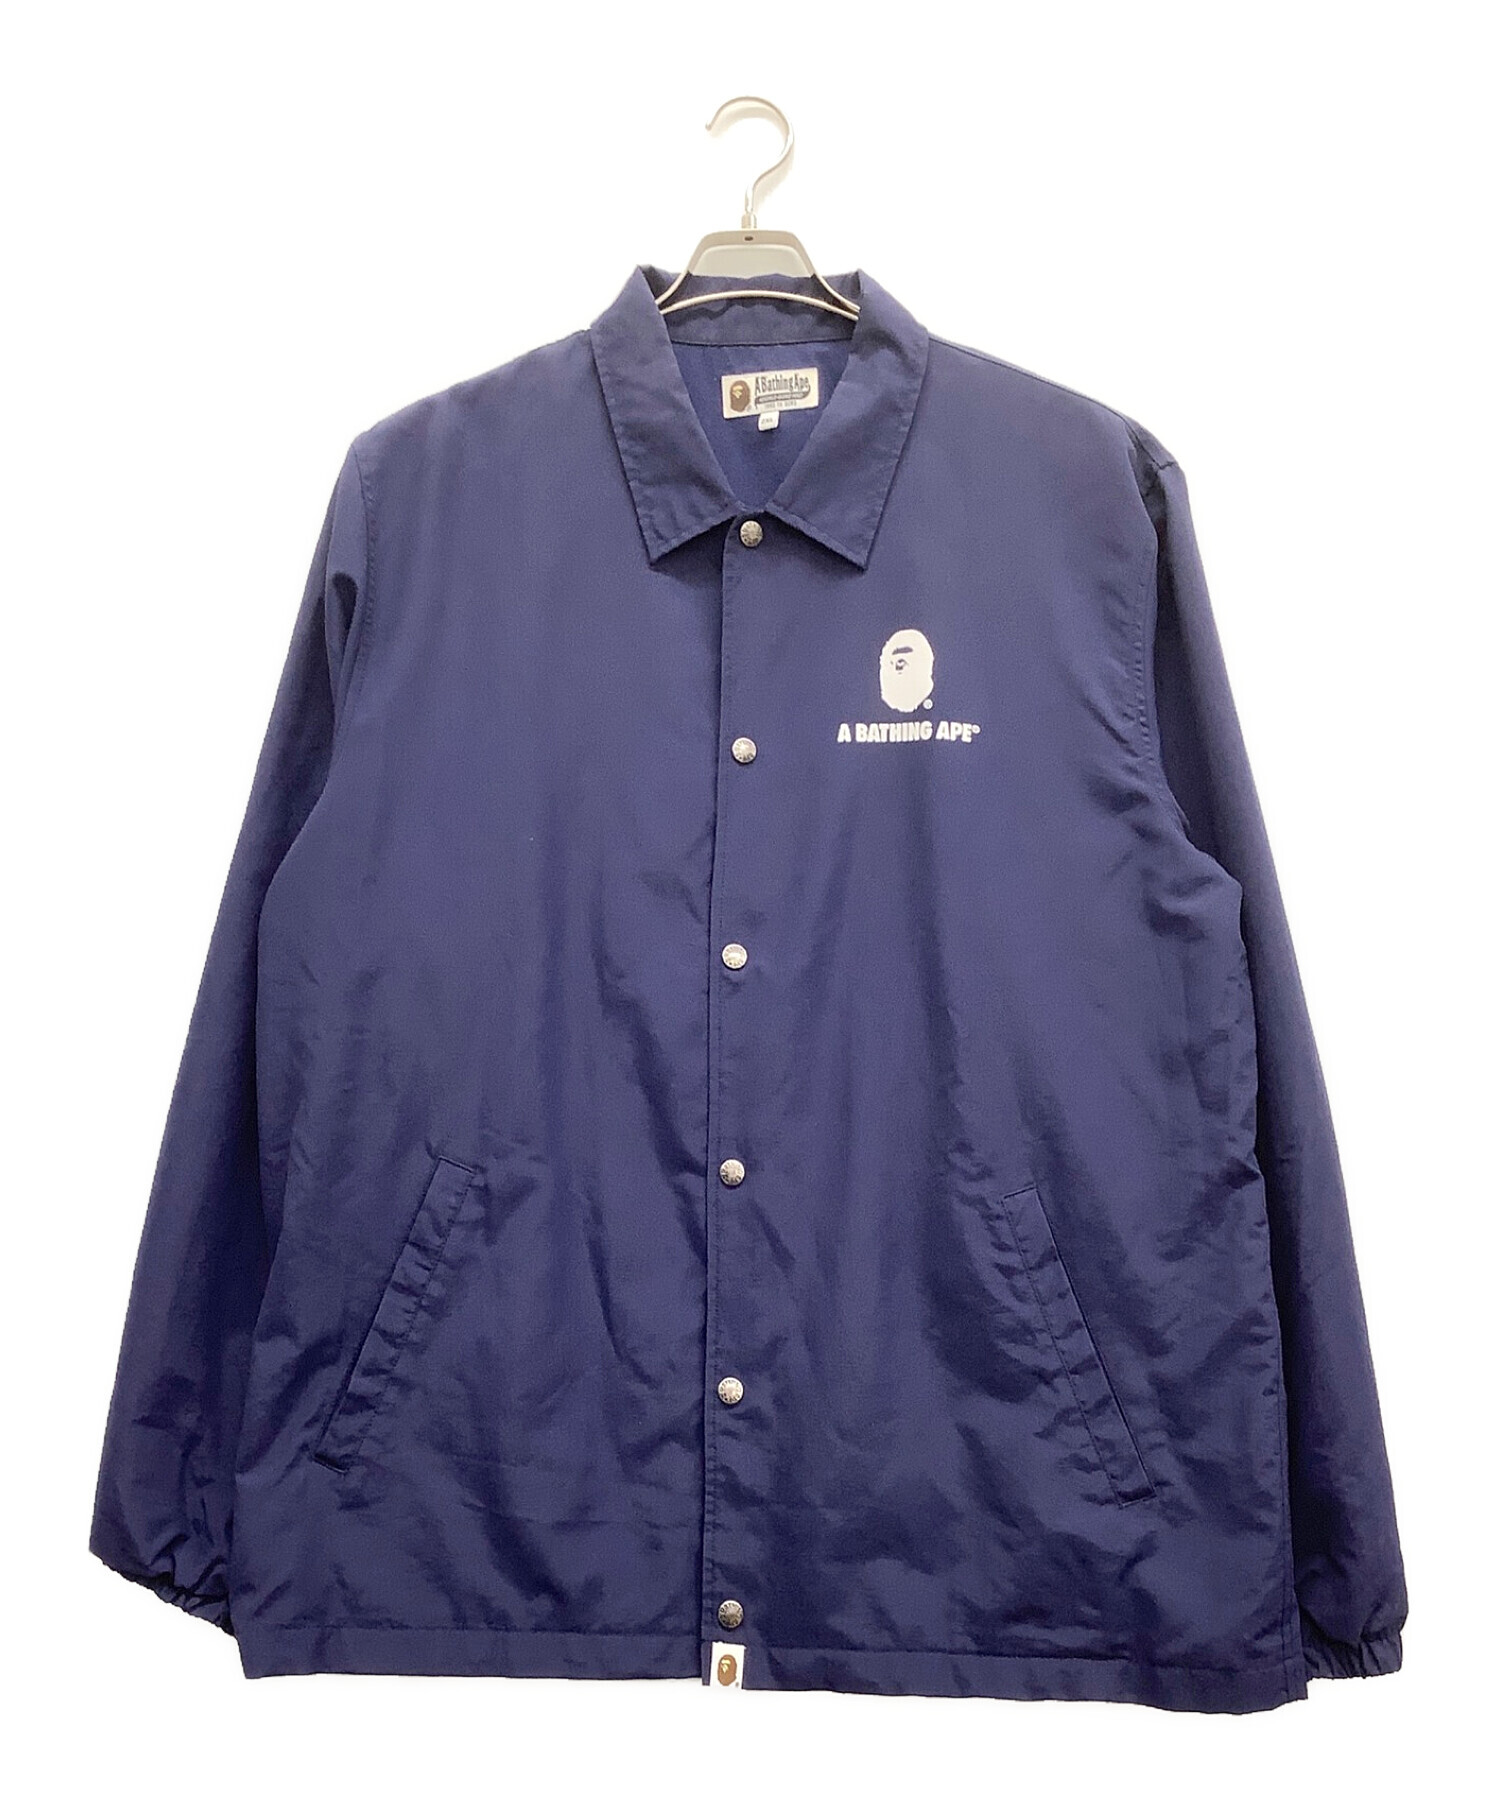 A APE BY BATHING APE（エーエイプバイアエイシングエイプ）A APE NOW COACH JACKET　コーチジャケット【007】